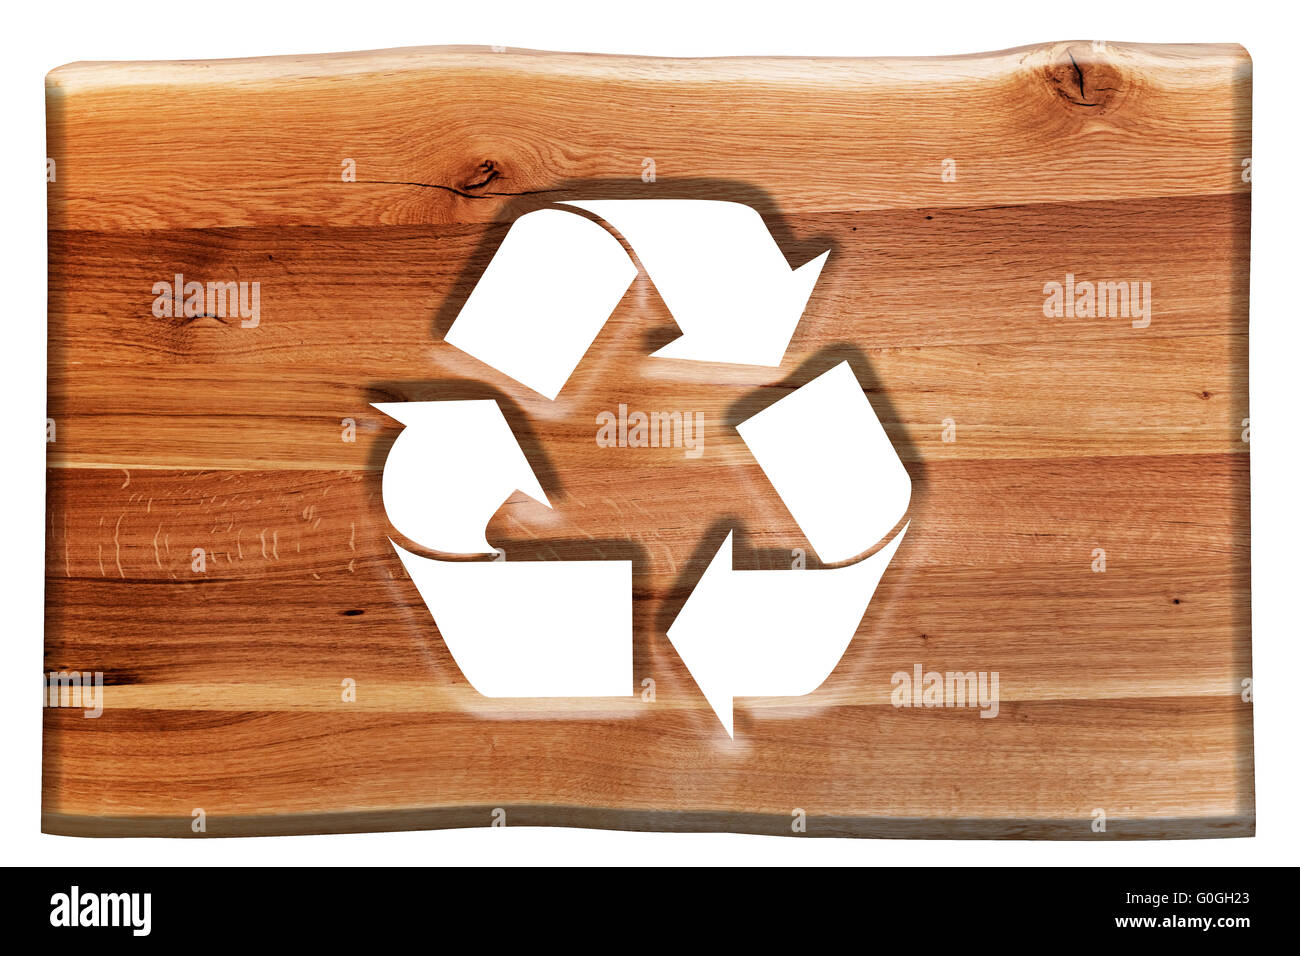 Recycling sign, symbol cut in wooden board isolated on white. Stock Photo